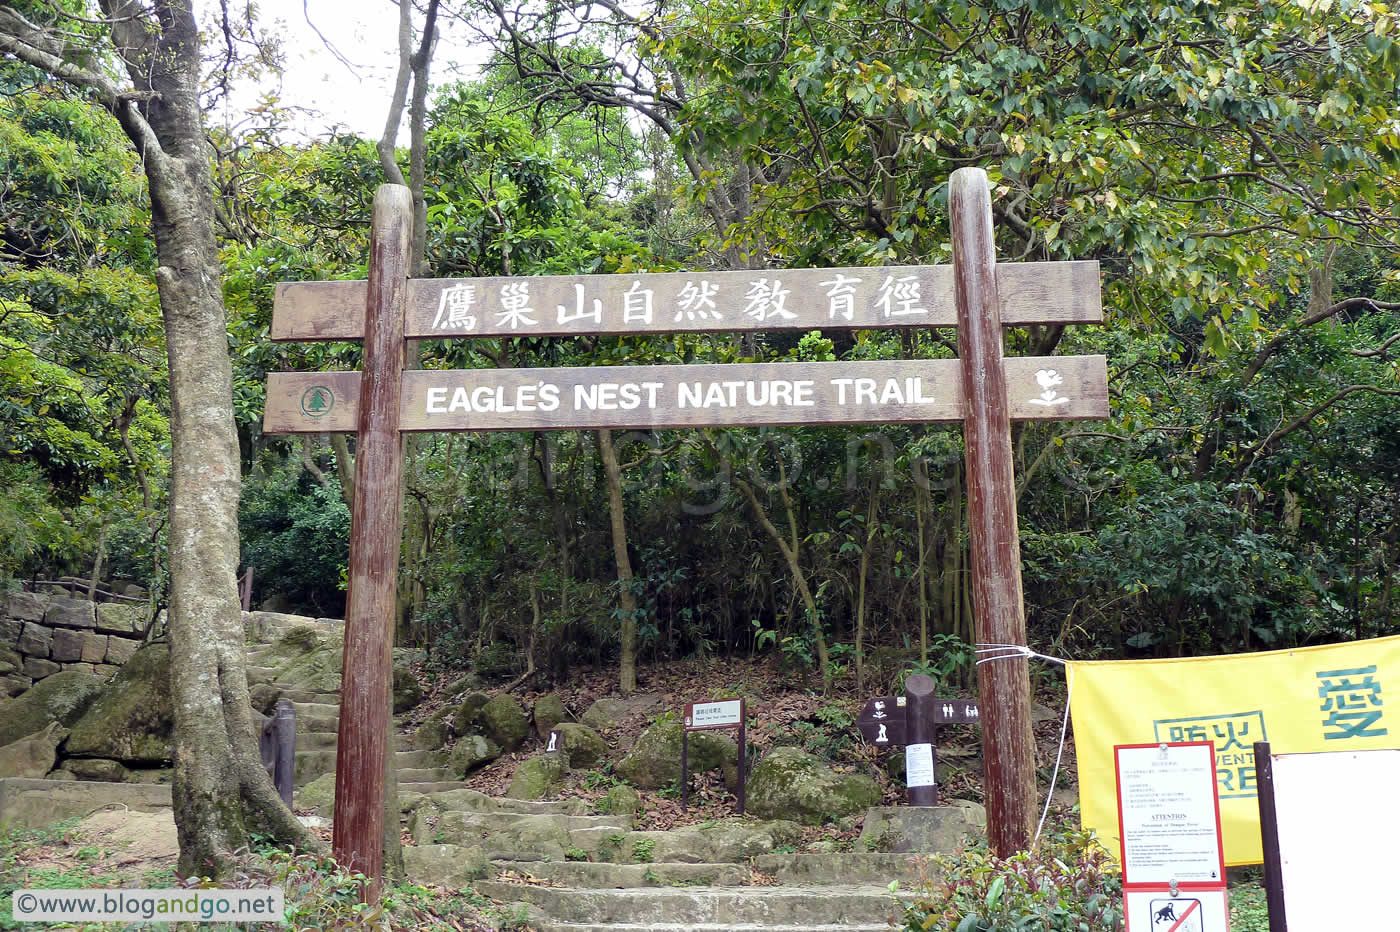 End of Maclehose Trail stage 5